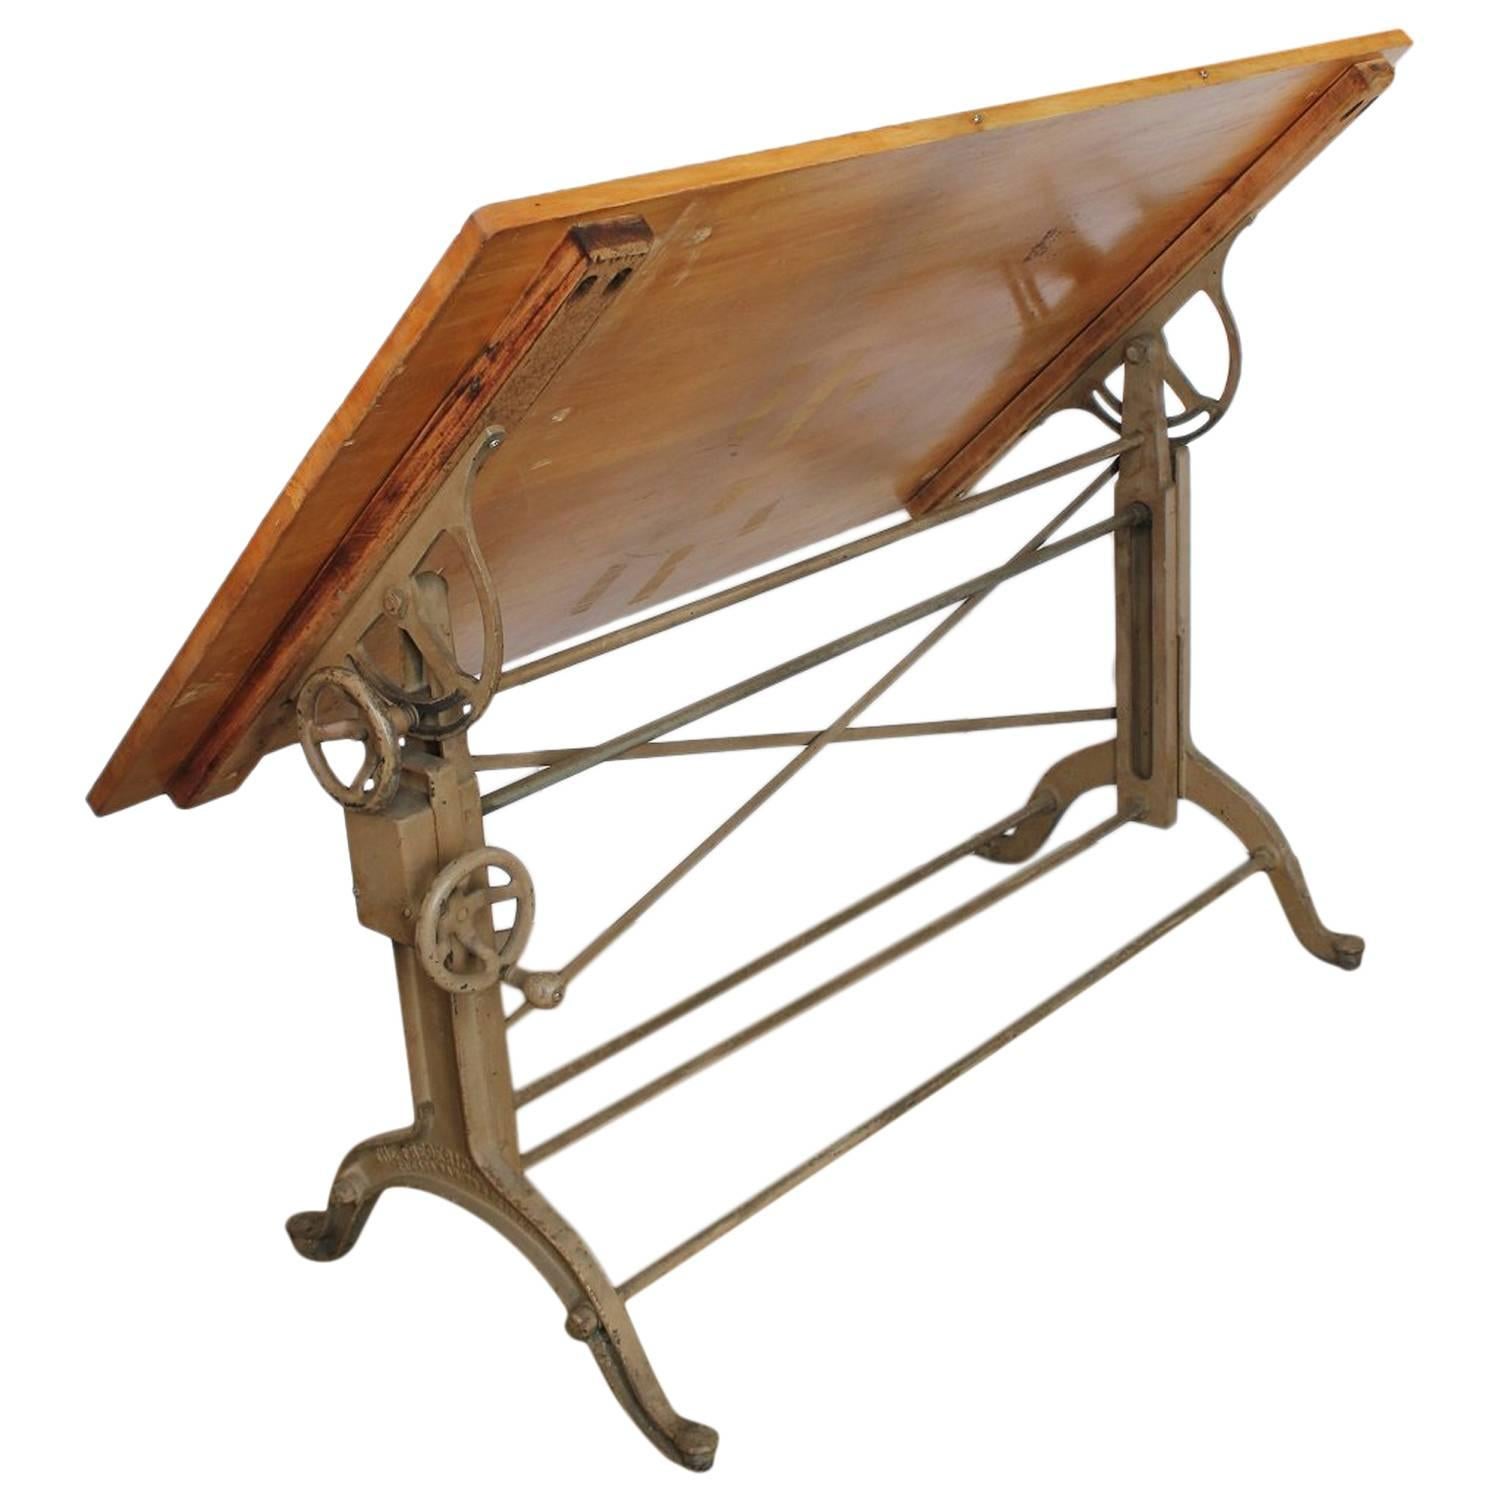 Antique American Drafting Table by the Frederic Post Co